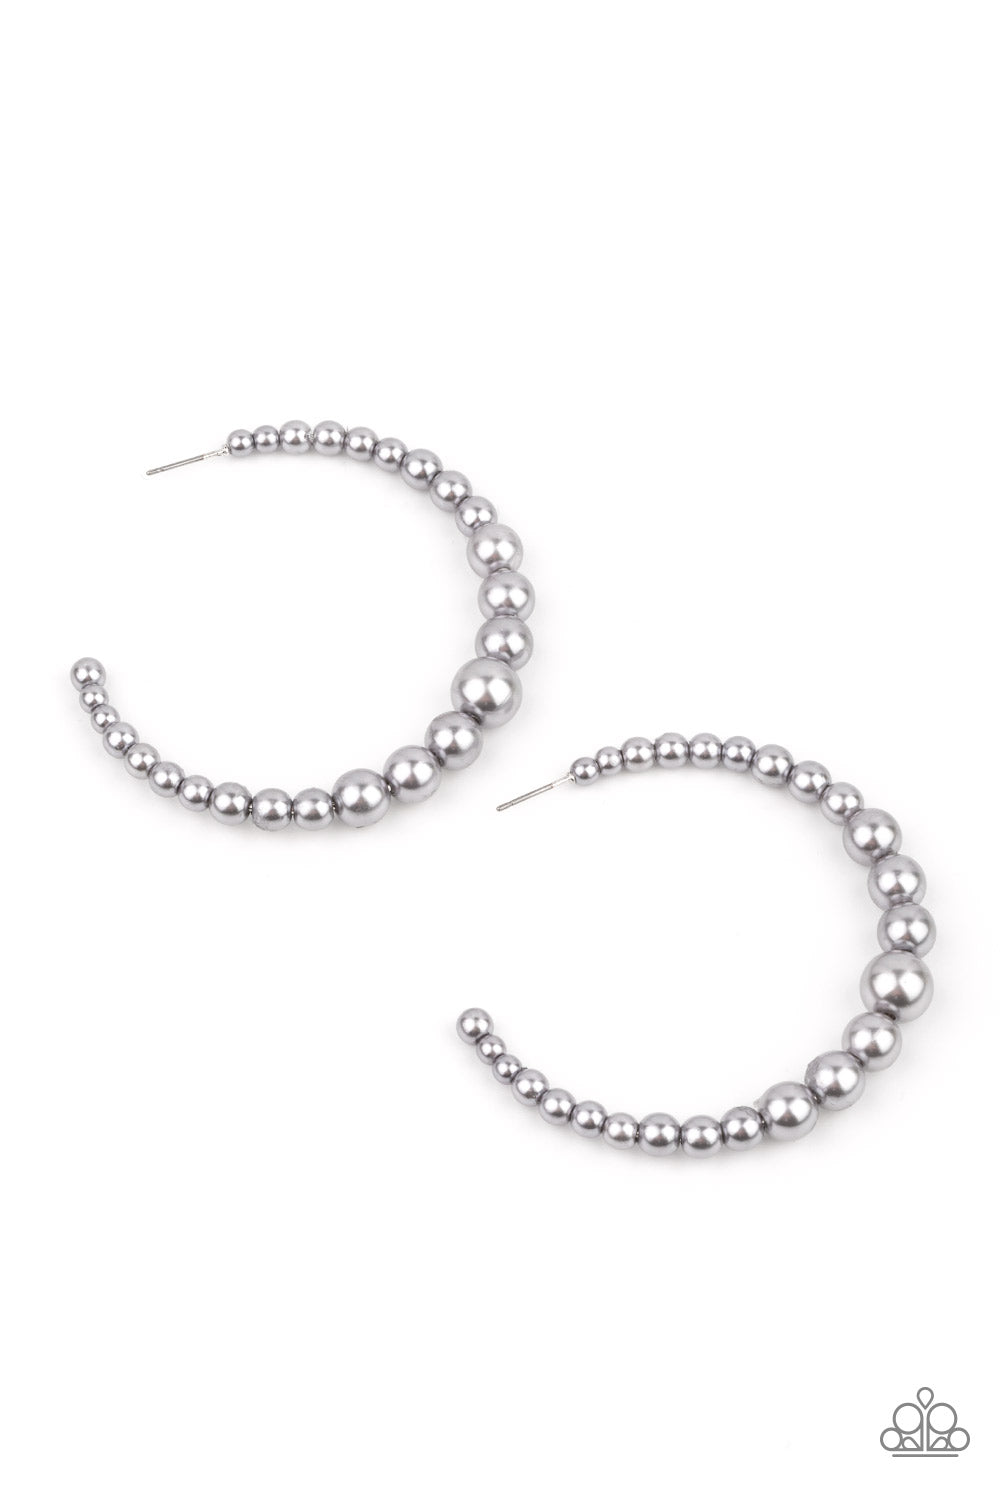 Gradually increasing in size at the center, a classic row of pearly silver beads are threaded along an oversized hoop for a posh finish.